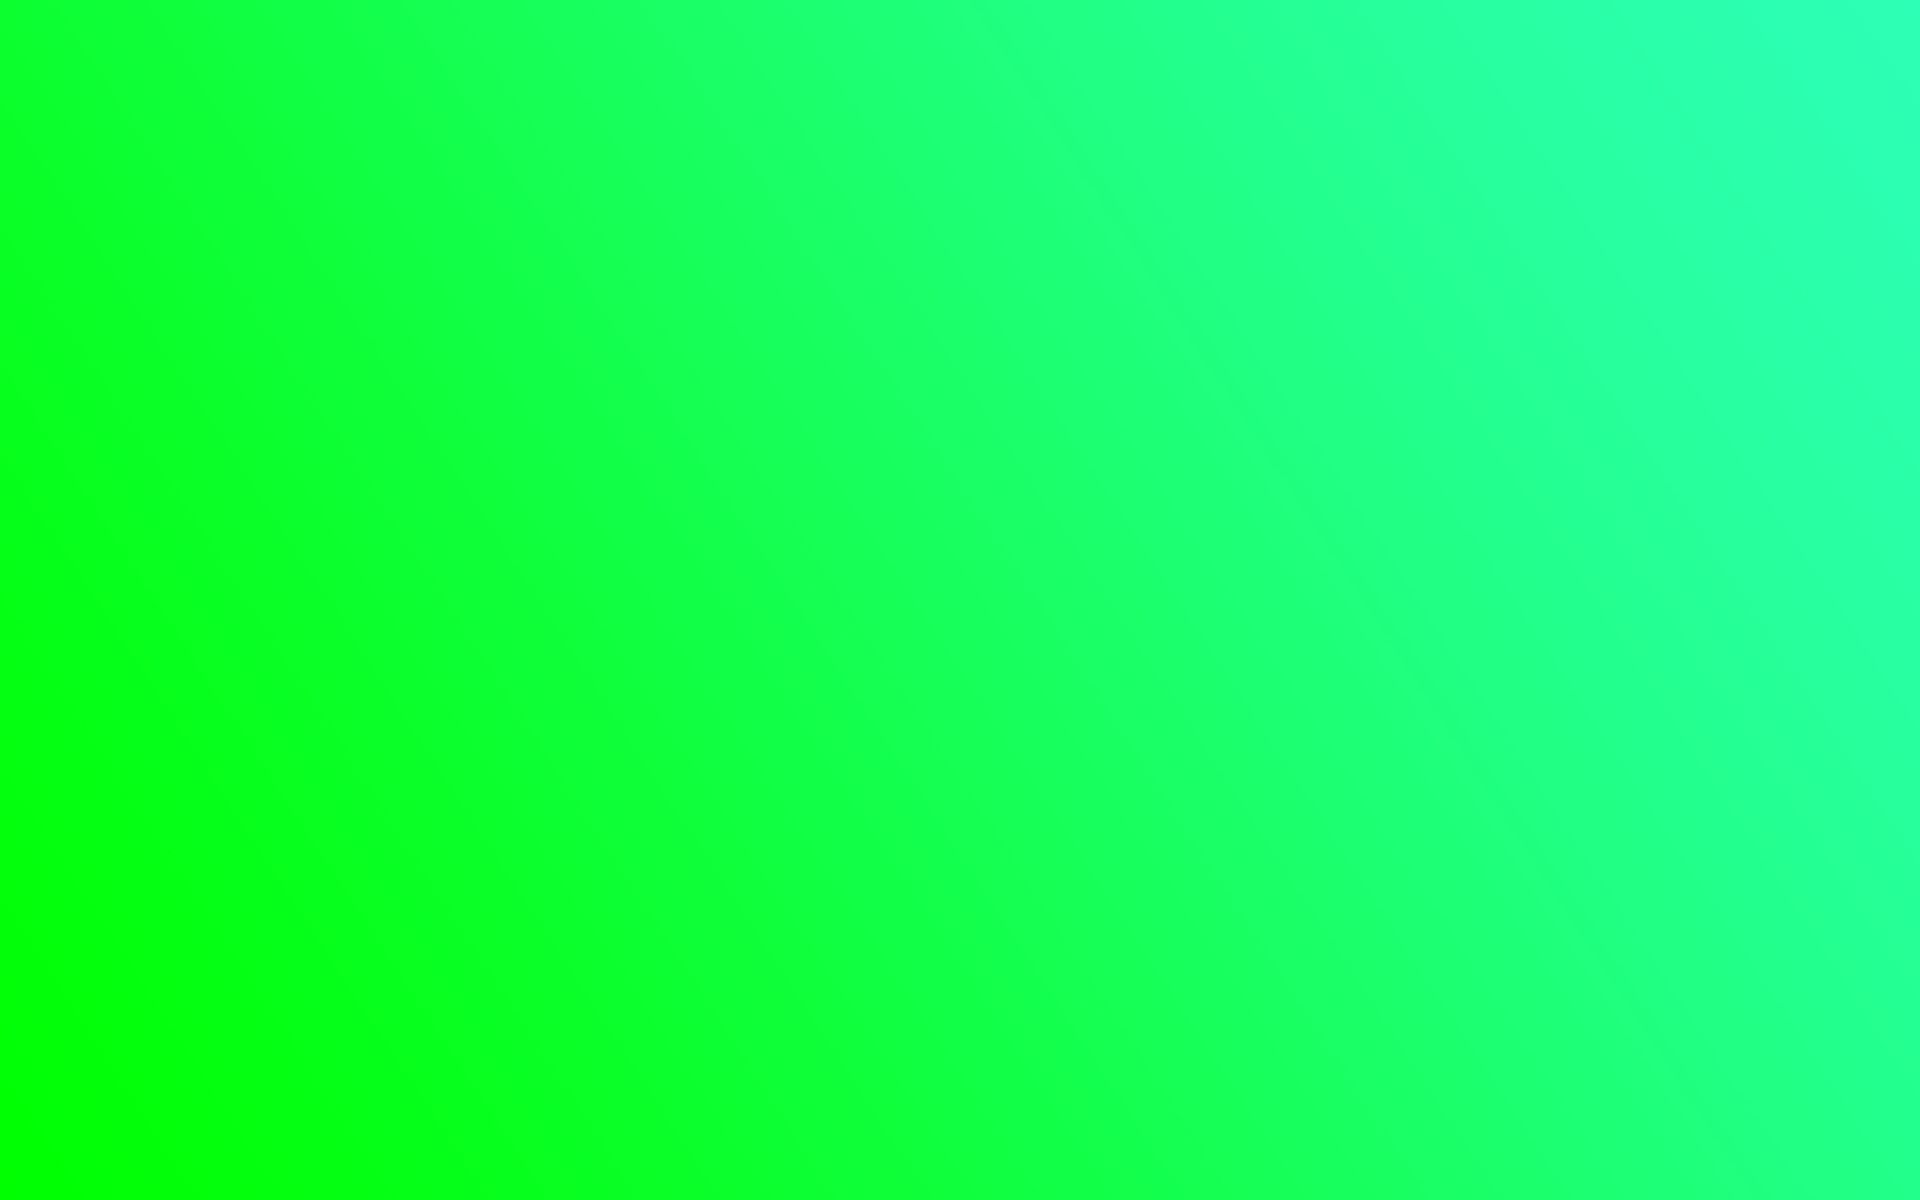 light, green, spots, abstract, shine, stains